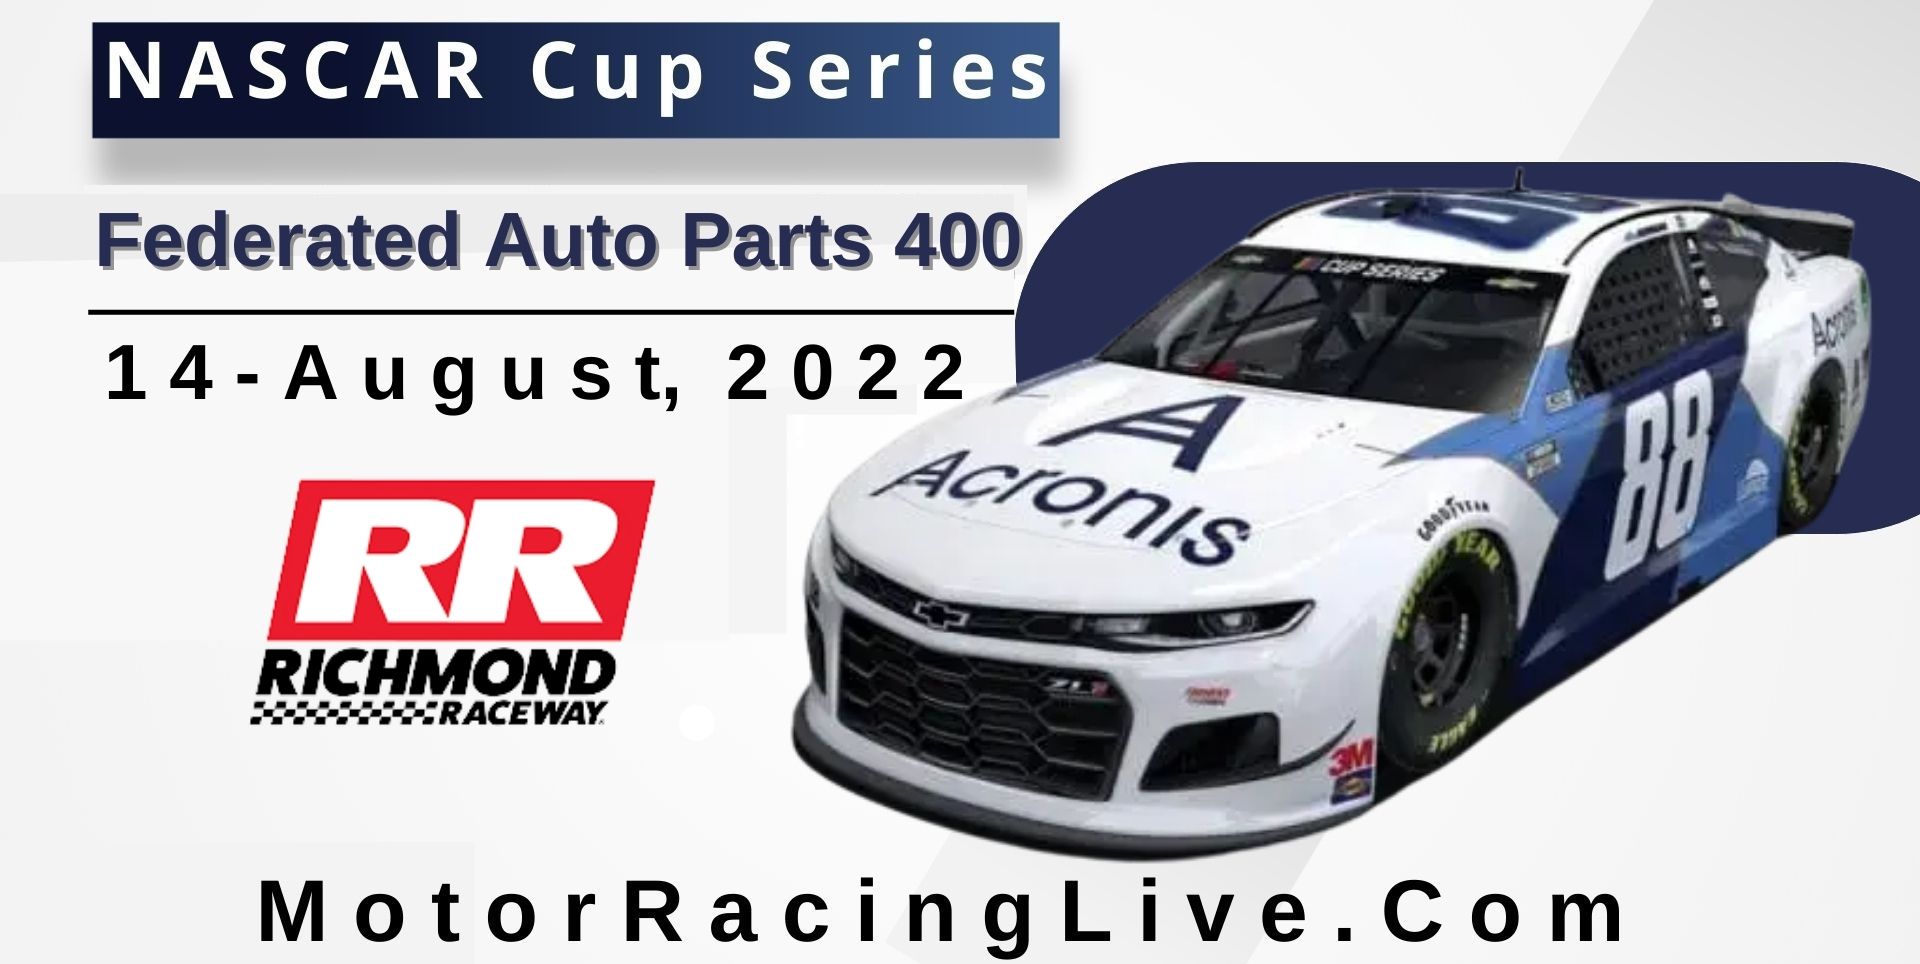 Federated Auto Parts 400 NASCAR Cup 2022 Live Stream